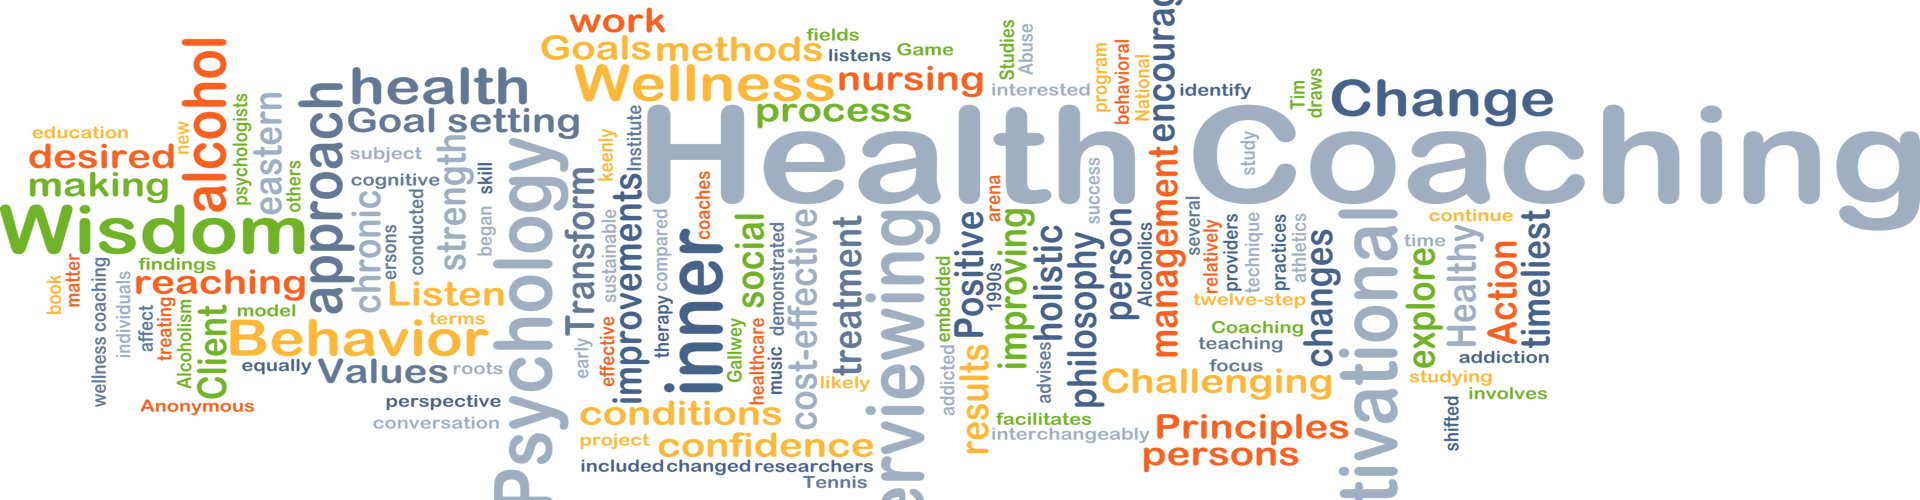 A word cloud of health care related words.